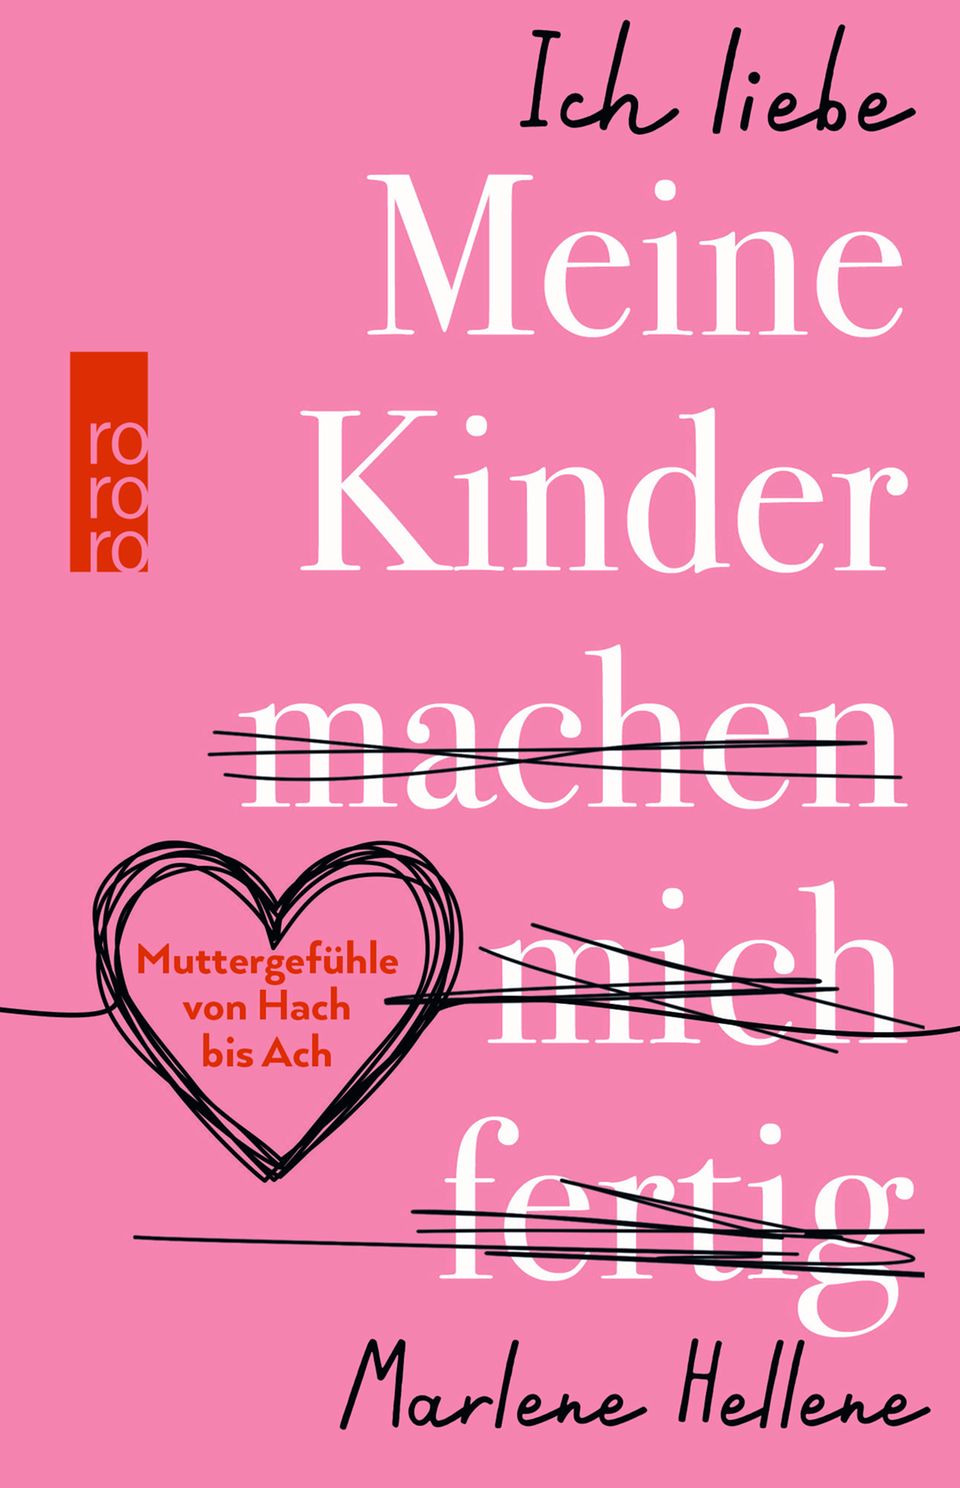 "I love MY CHILDREN are killing me - motherly feelings from ugh to ugh" by Marlene Hellene was published by Rowohlt-Verlag